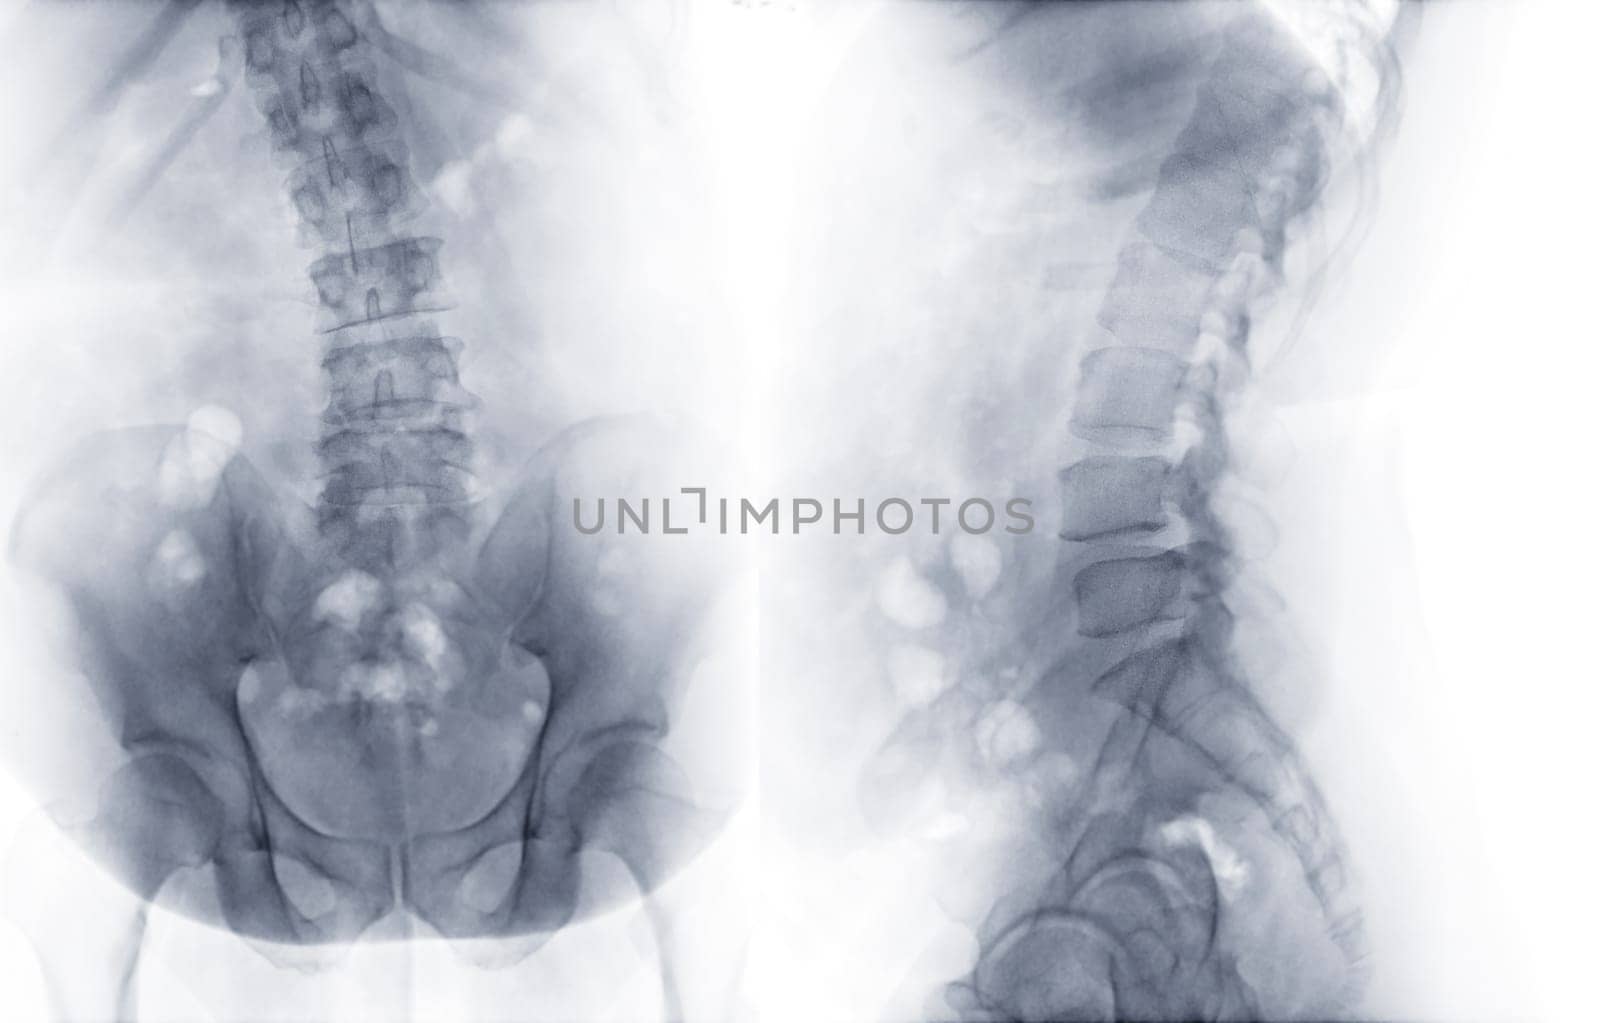 X-ray image of lumbar Spine  or L-s spine AP and lateral view for diagnosis lower back pain.